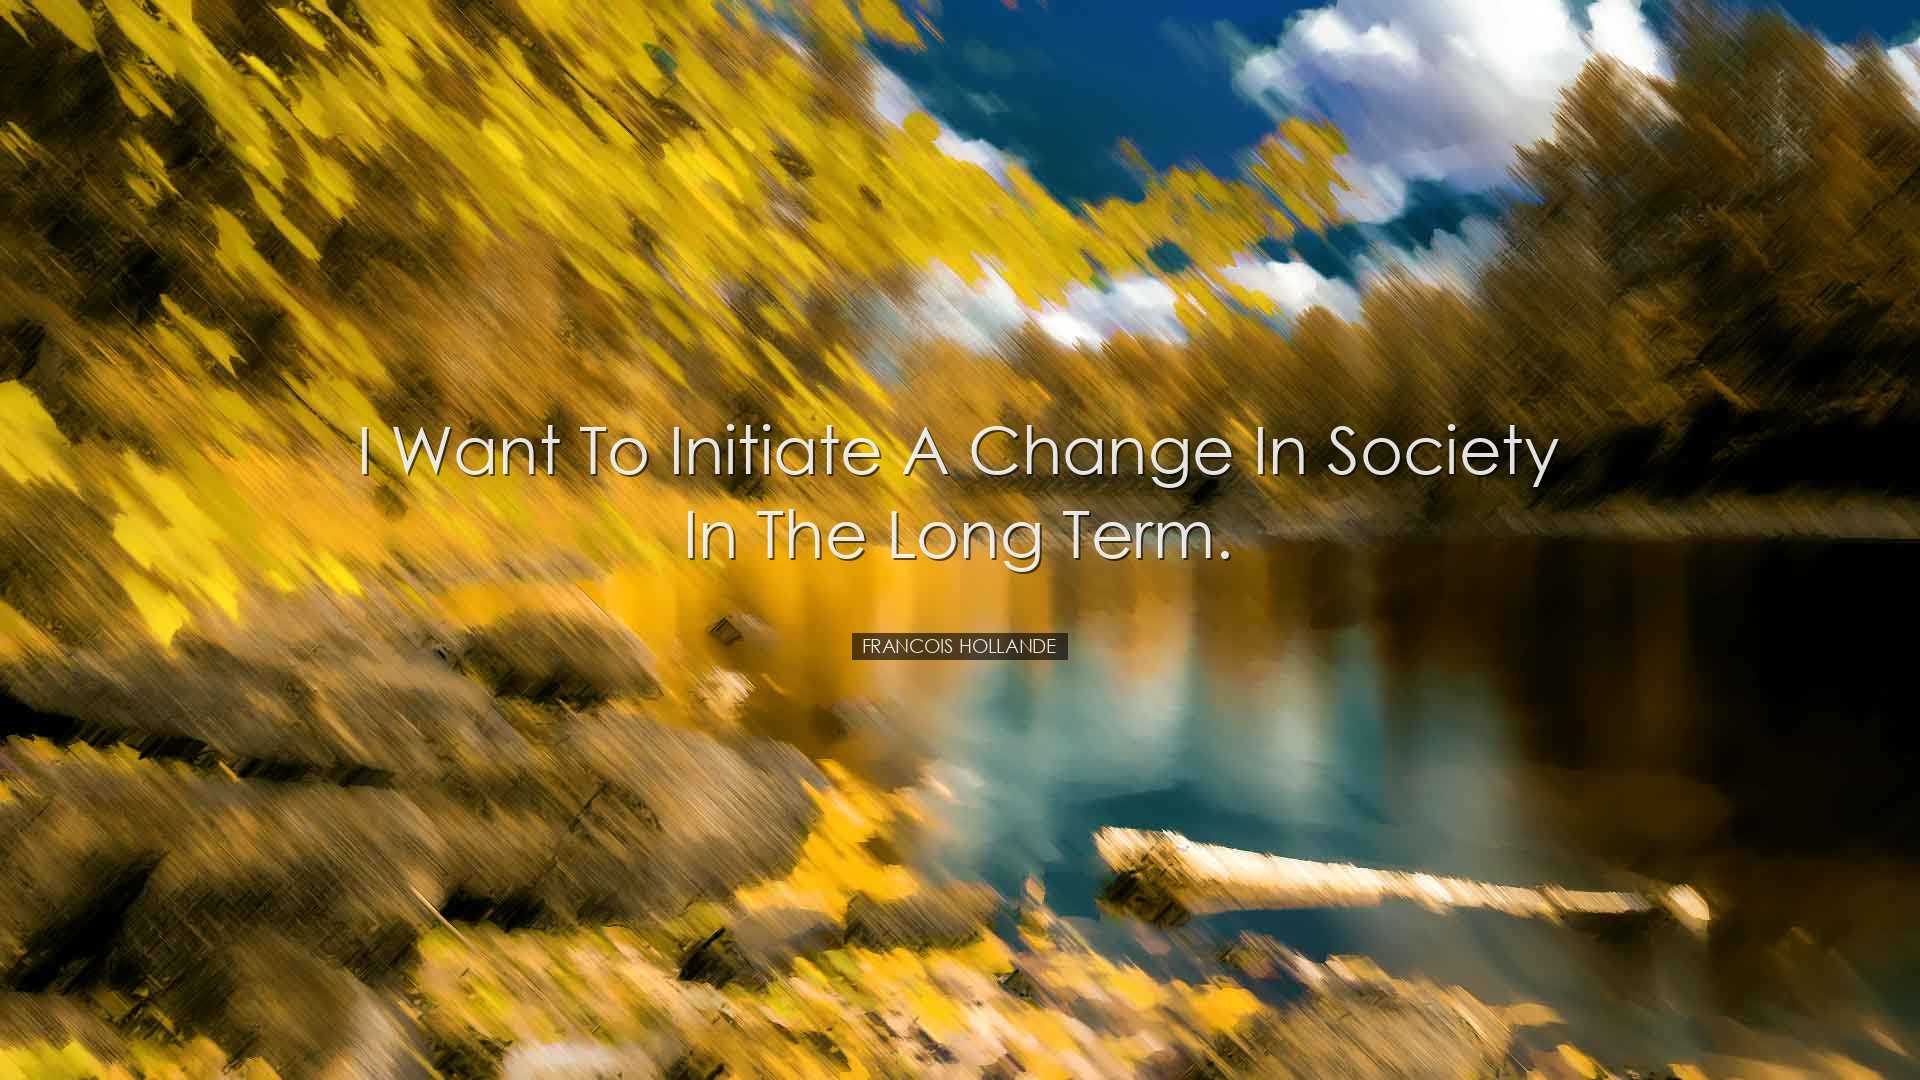 I want to initiate a change in society in the long term. - Francoi